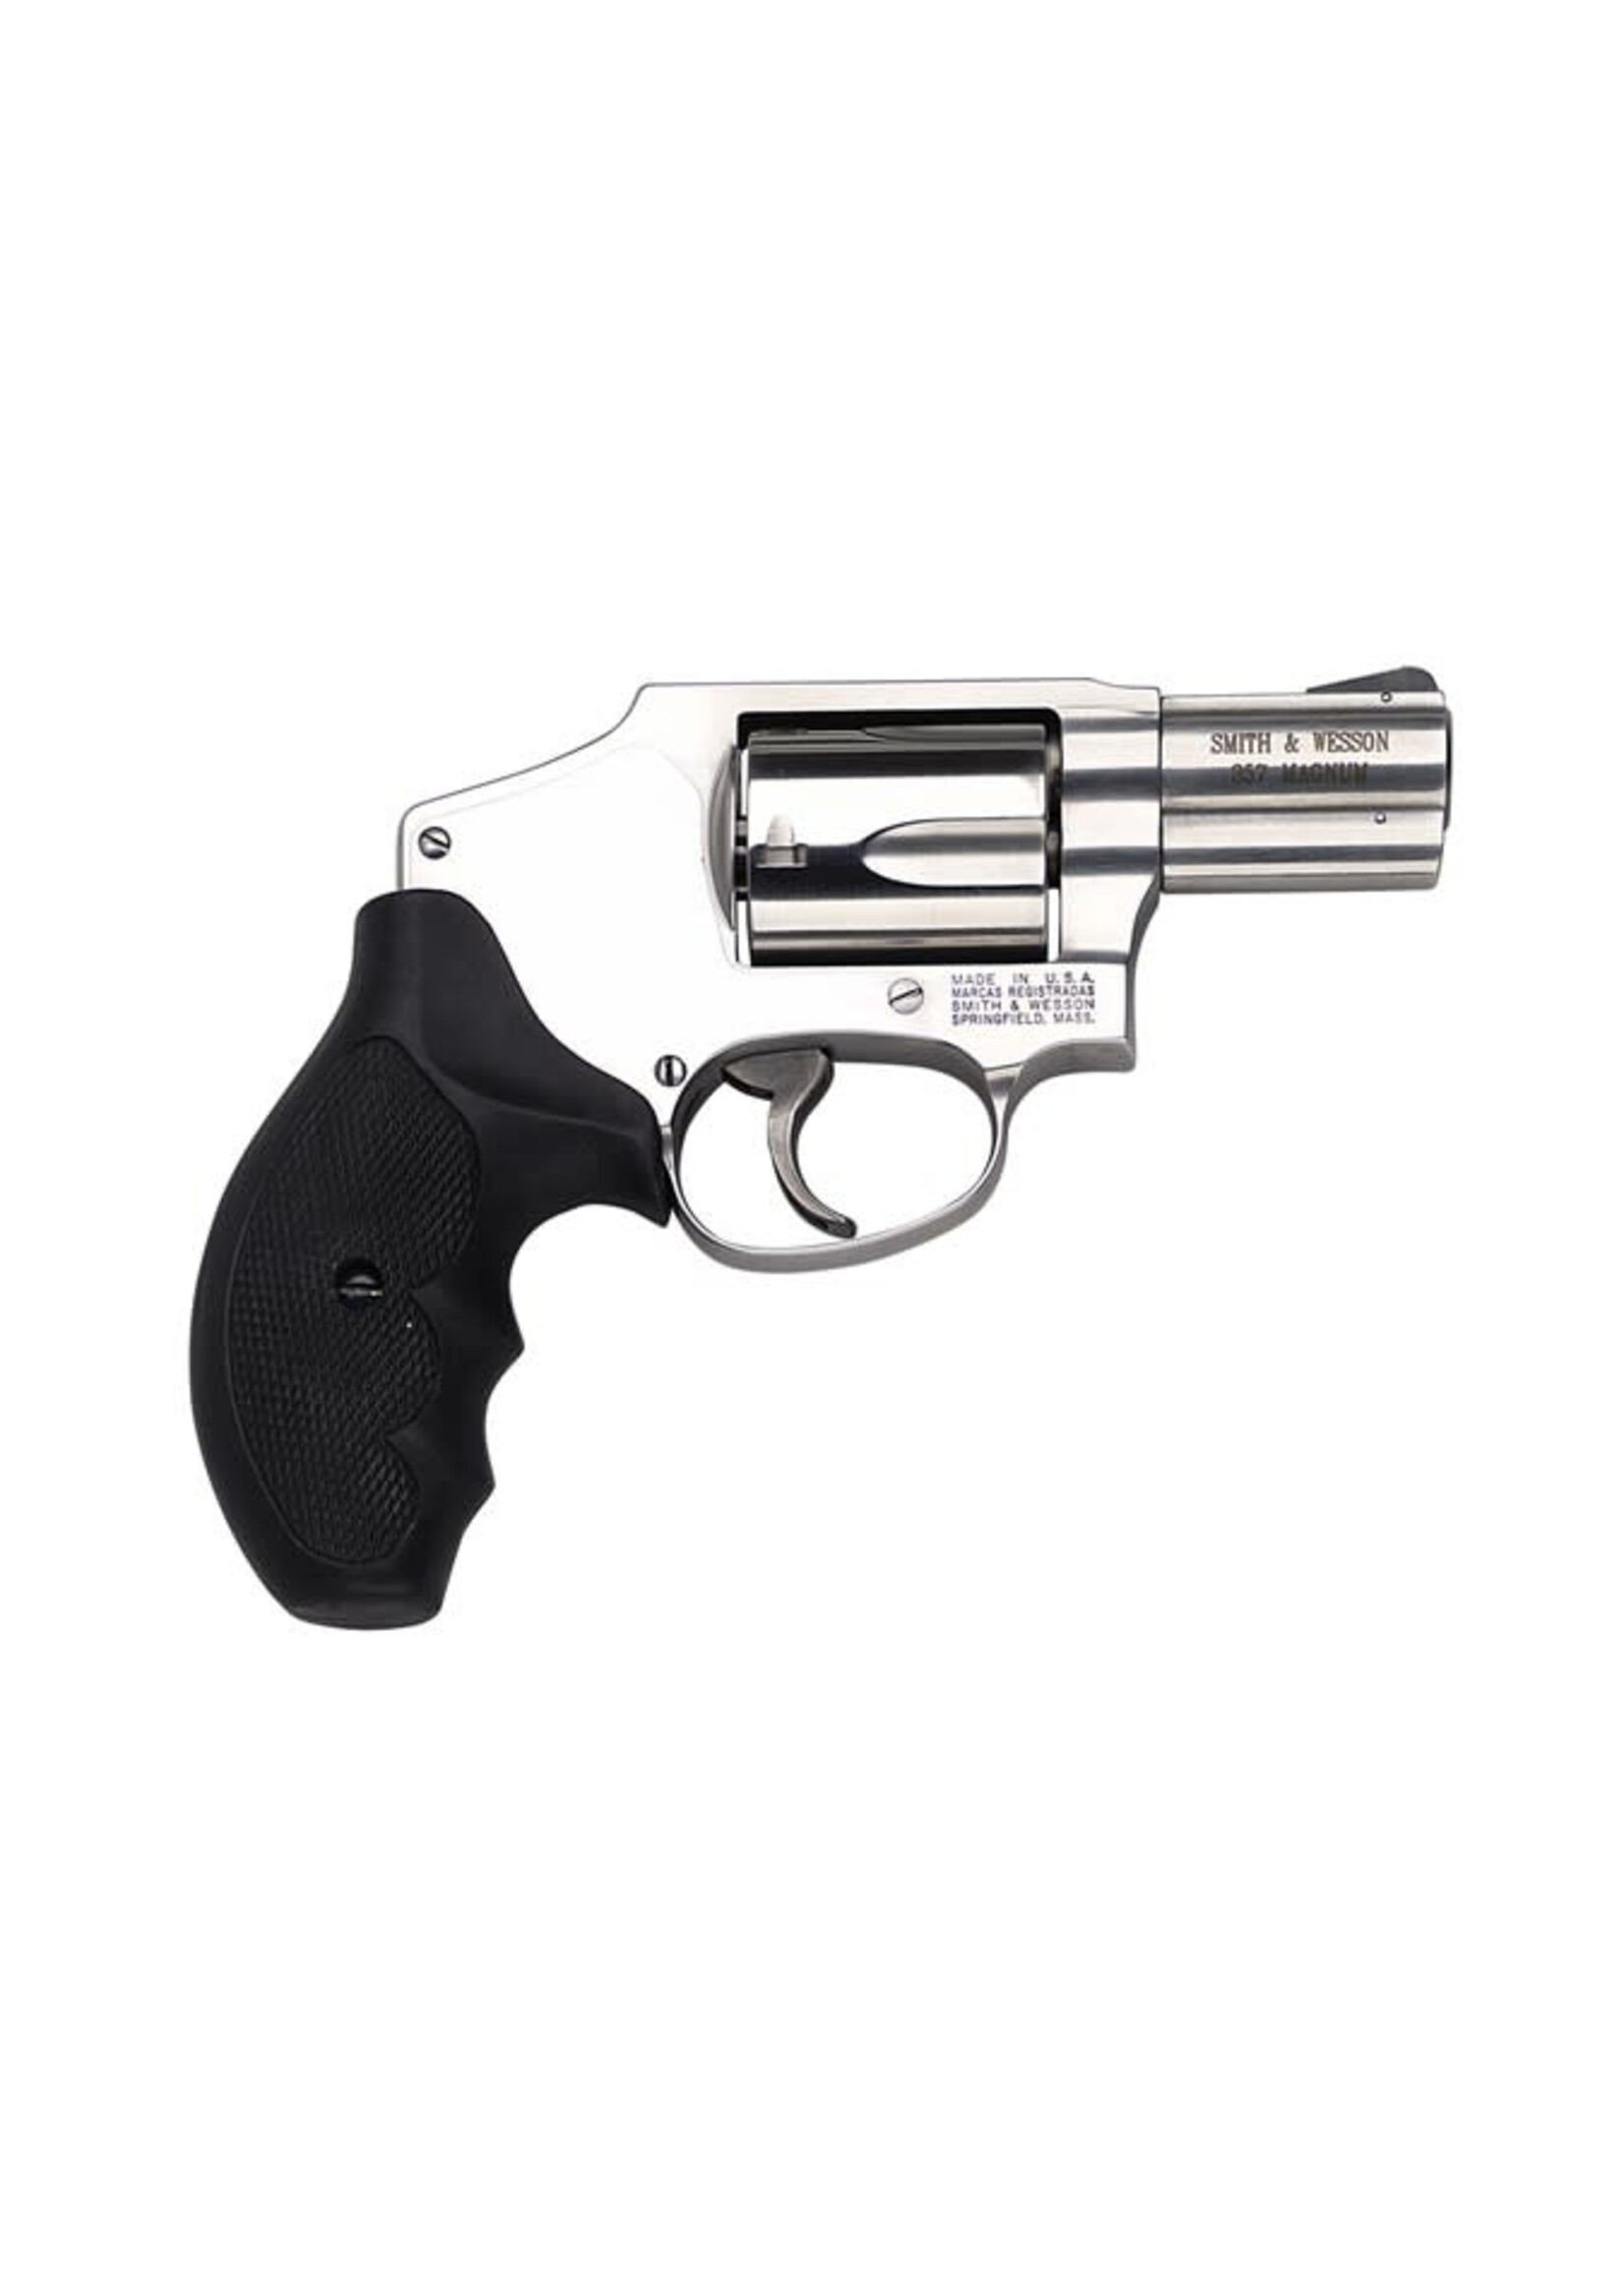 Smith and Wesson (S&W) Smith & Wesson 163690 Model 640 357 Mag or 38 S&W Spl +P 5 Shot 2.12" Stainless Steel Barrel/Cylinder, Satin Stainless Steel J-Frame, Snag-free Enclosed Hammer, Internal Lock